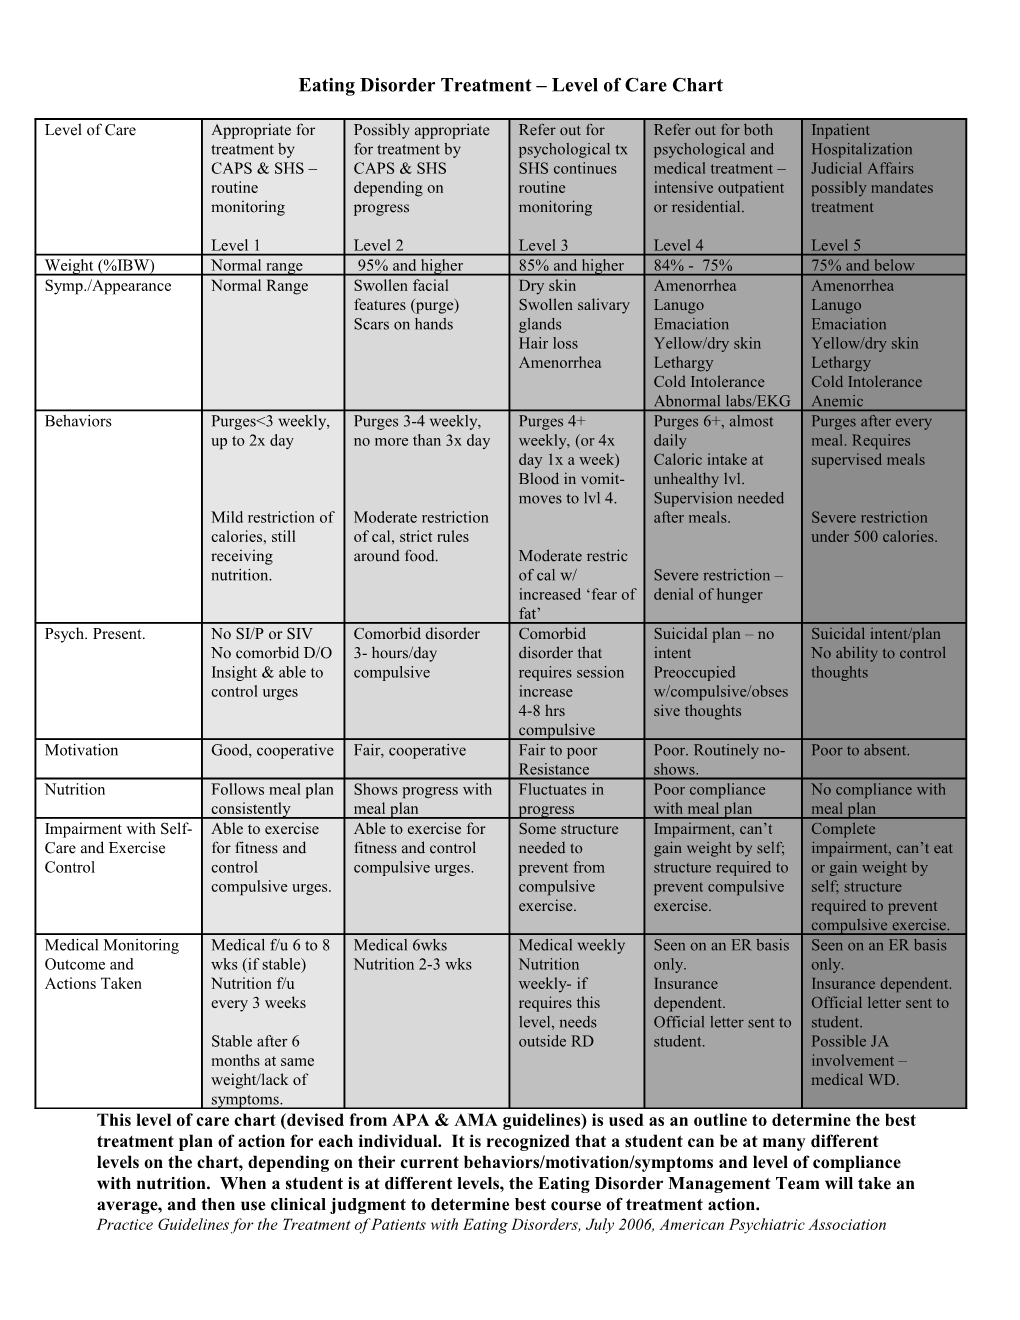 Eating Disorder Treatment Level of Care Chart